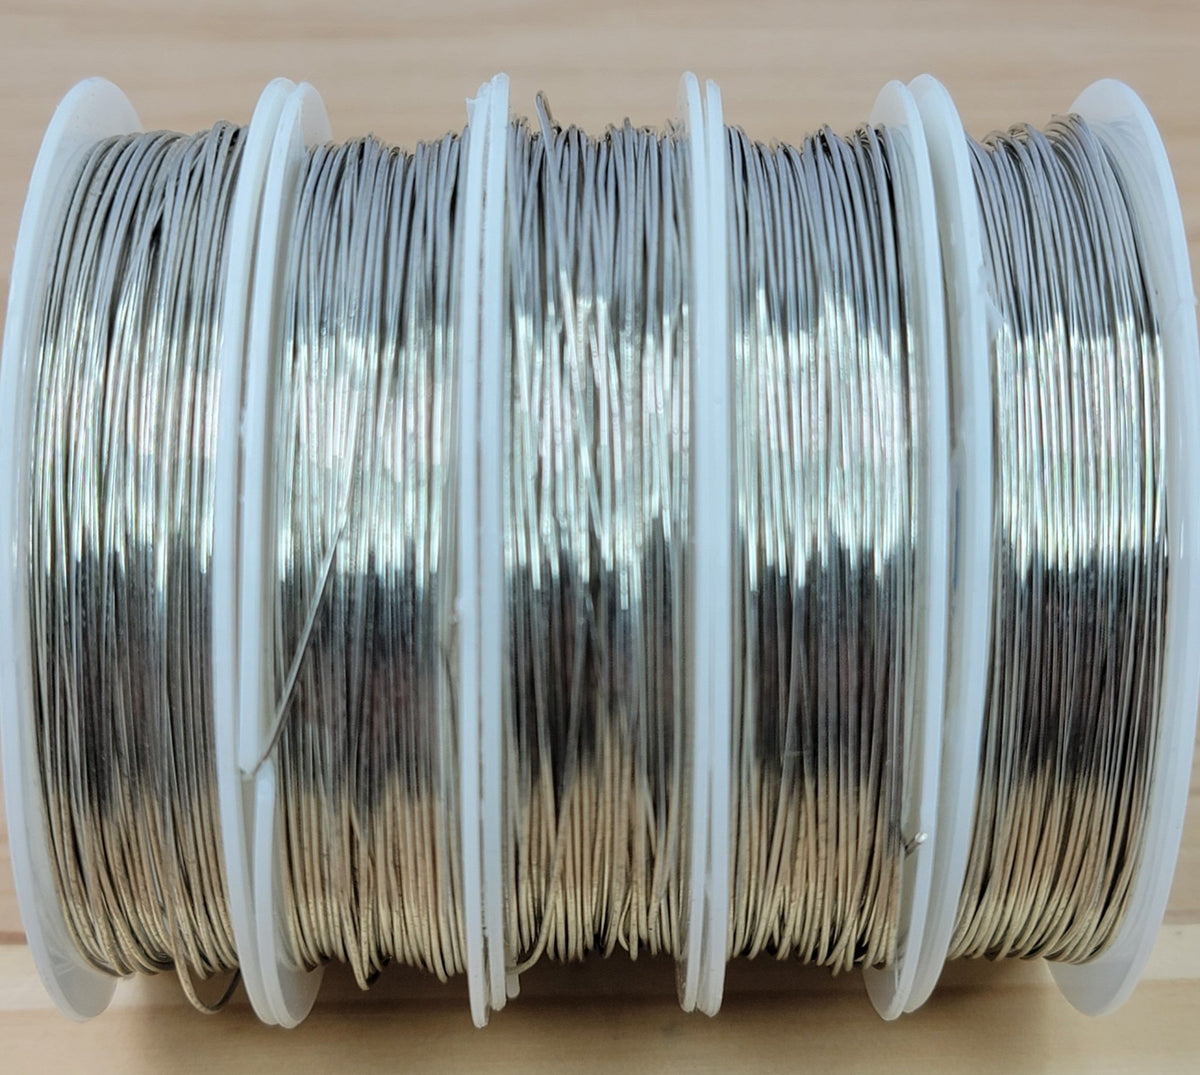 Silver - Copper Core 22 Gauge (0.60mm) Jewelry Wire - 25 Foot Spool  (WIRE03) freeshipping - Beads and Babble